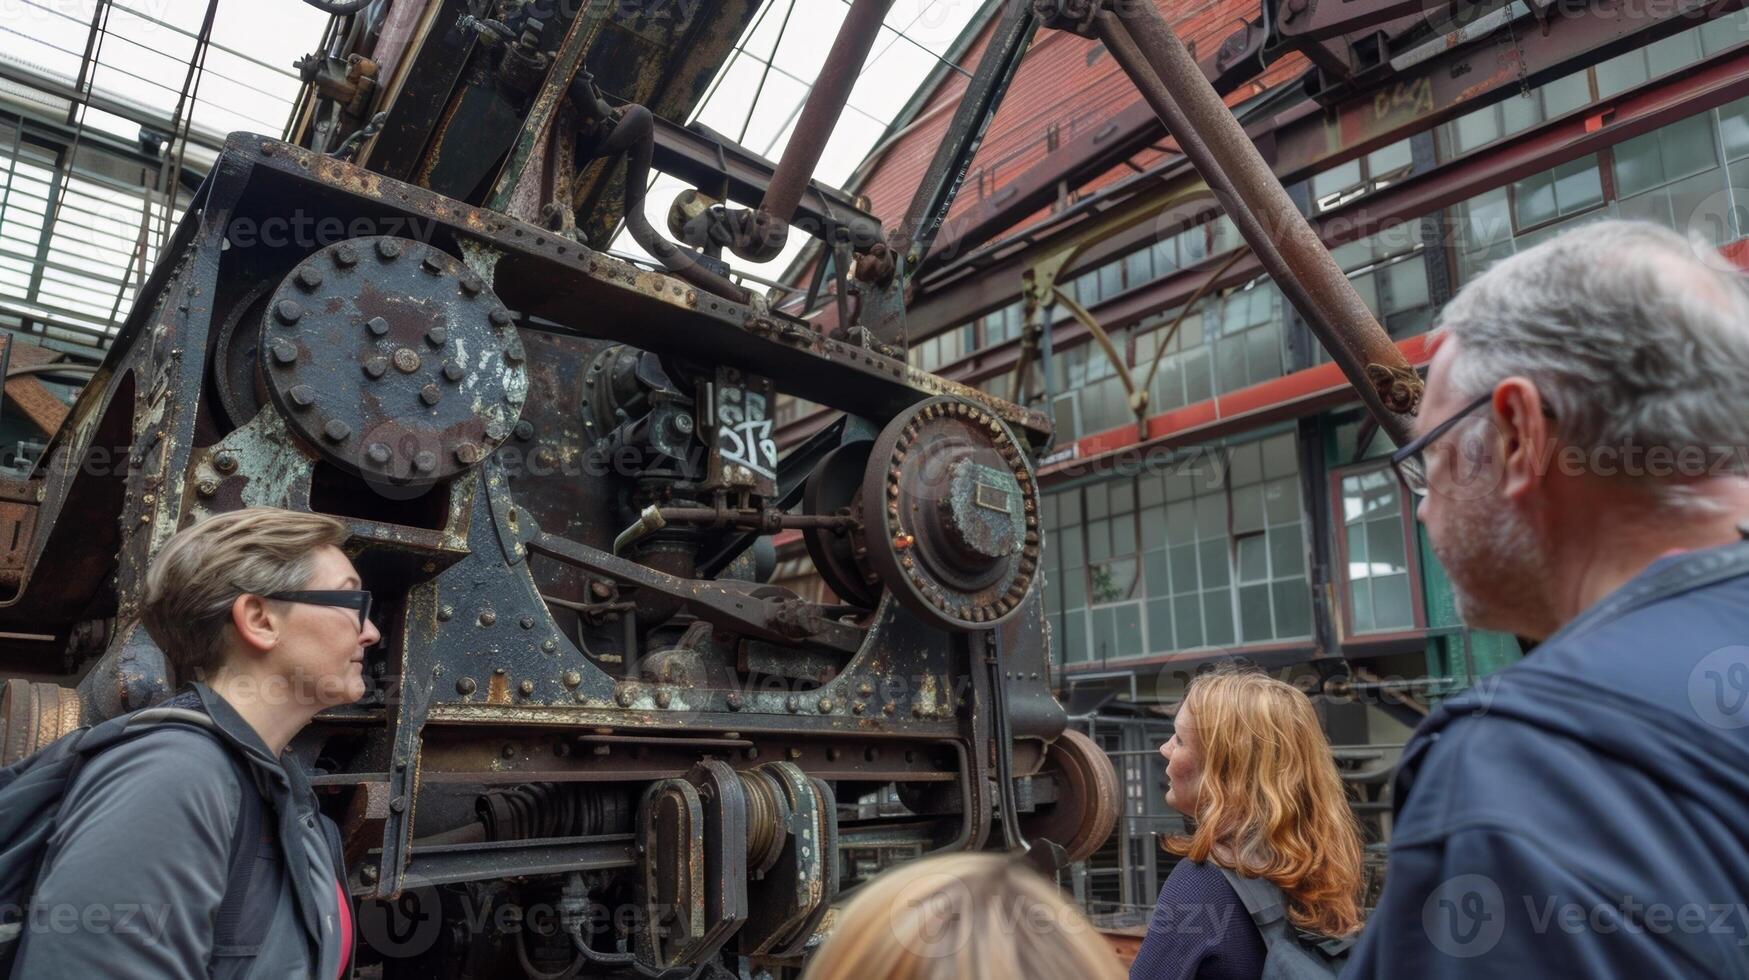 The sounds of clanking metal and engines revving fills the air as a group of volunteers carefully demonstrate the workings of a centuryold crane photo